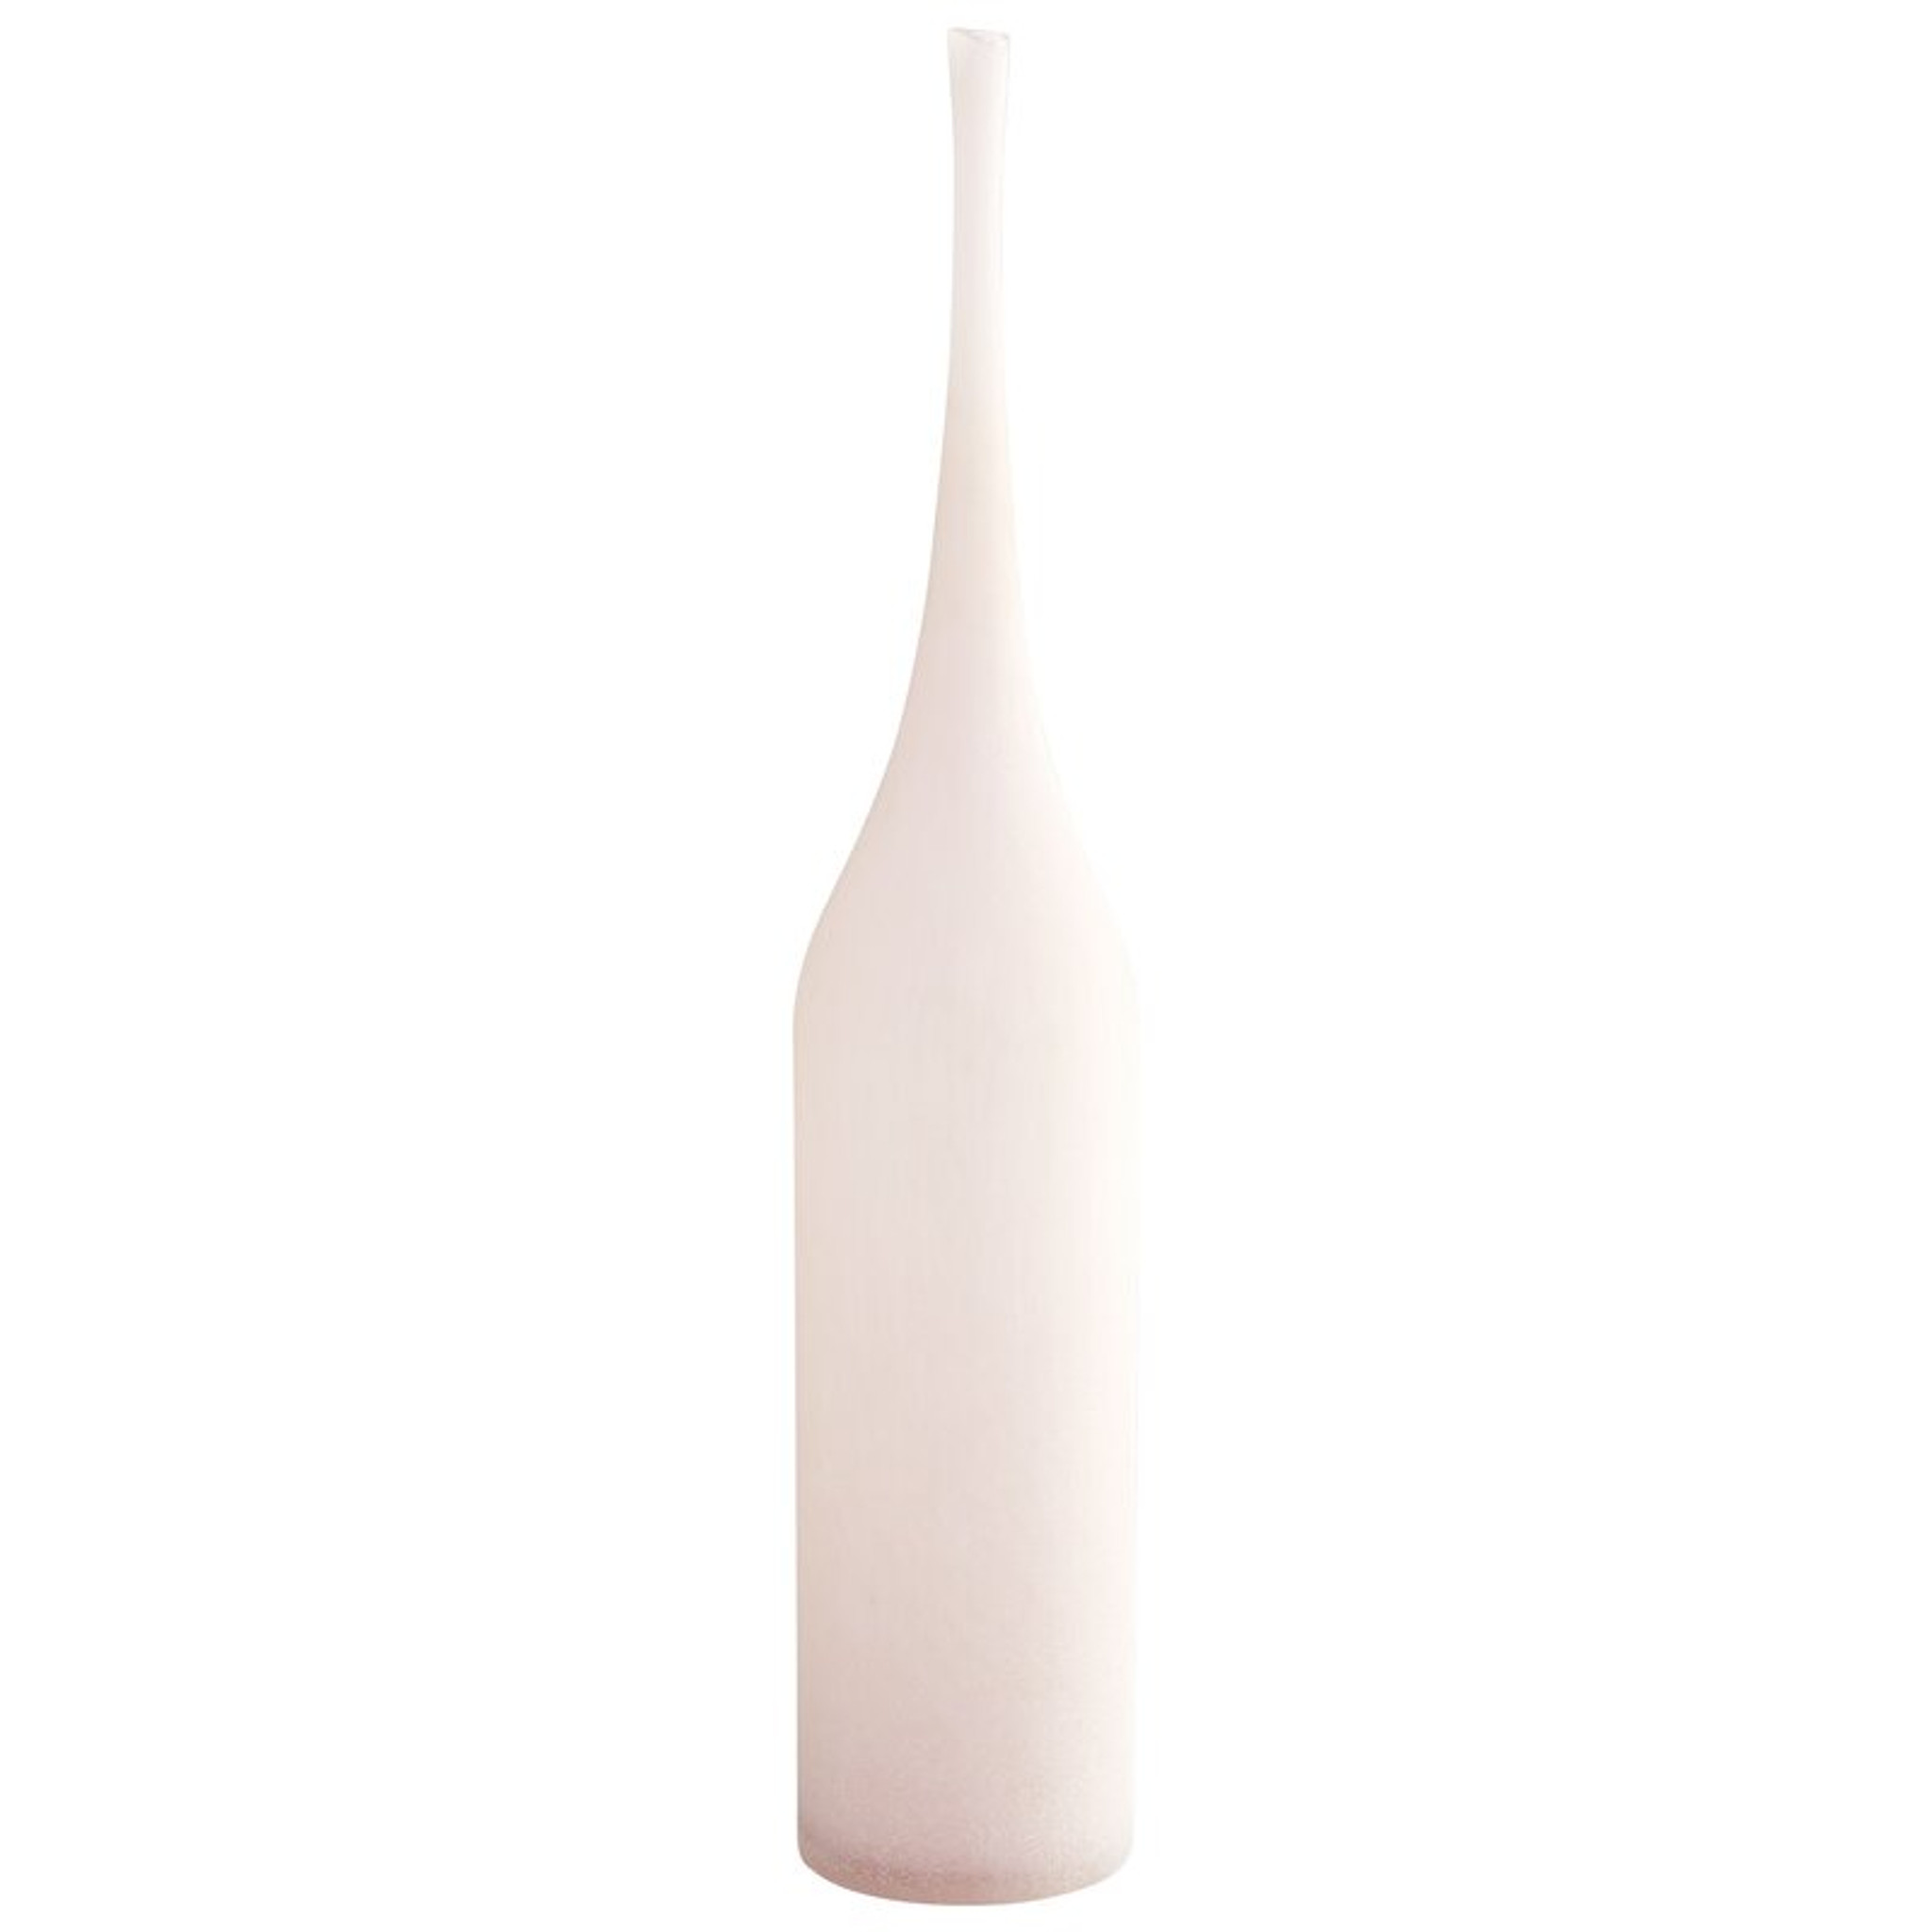 cyan designs karina frosted glass pink tall neck mid century modern vase